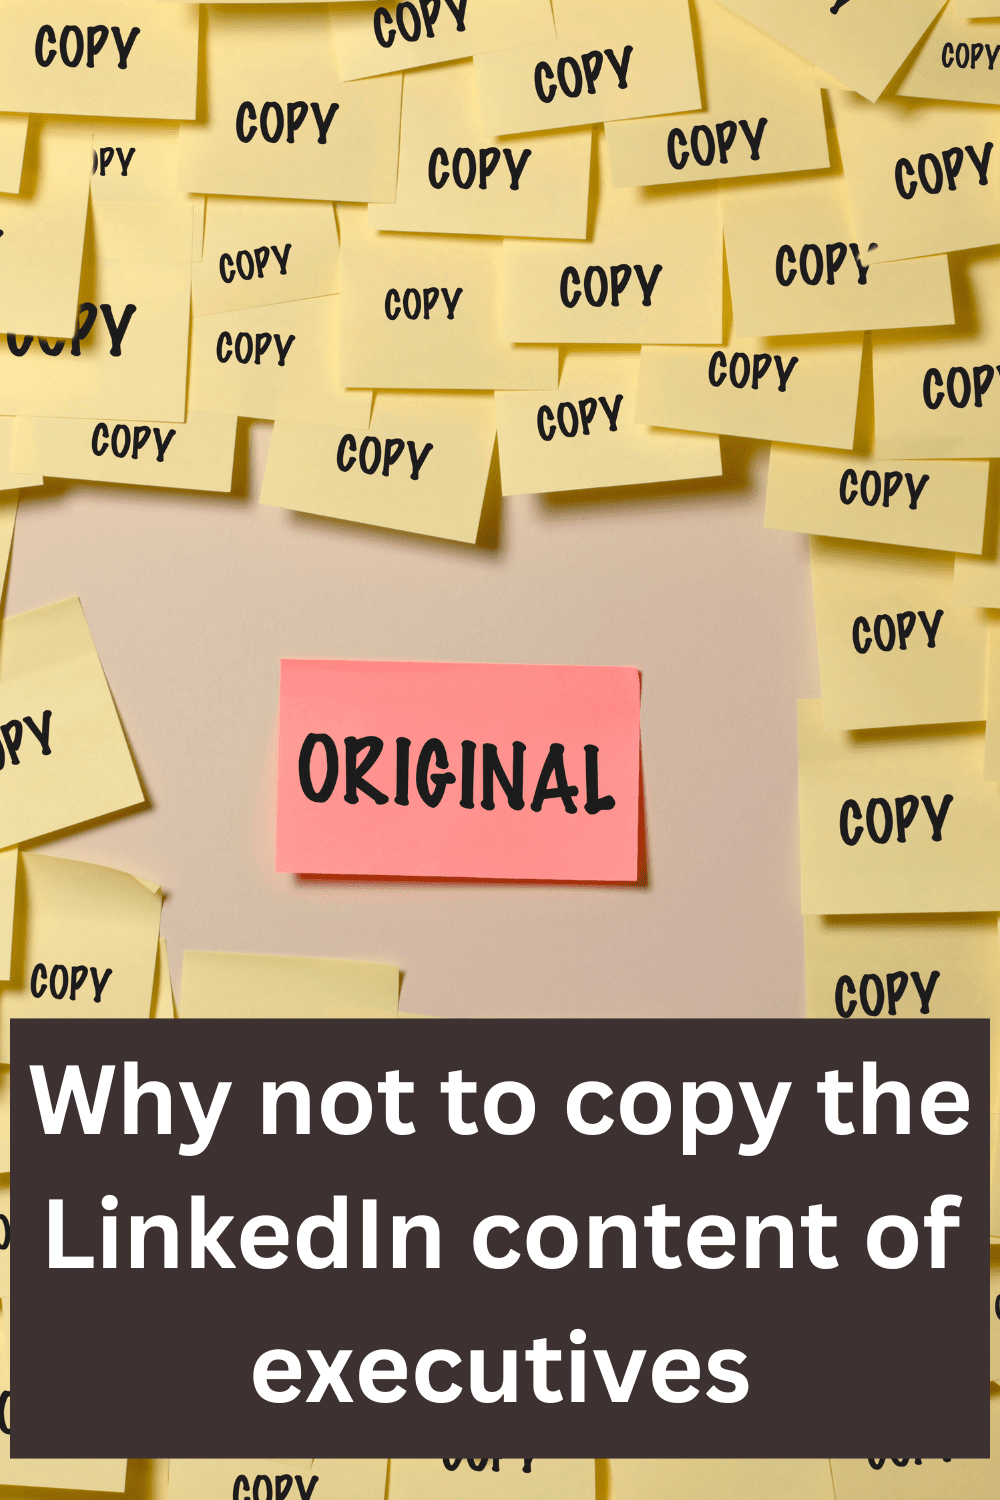 Why not to copy the LinkedIn content of executives